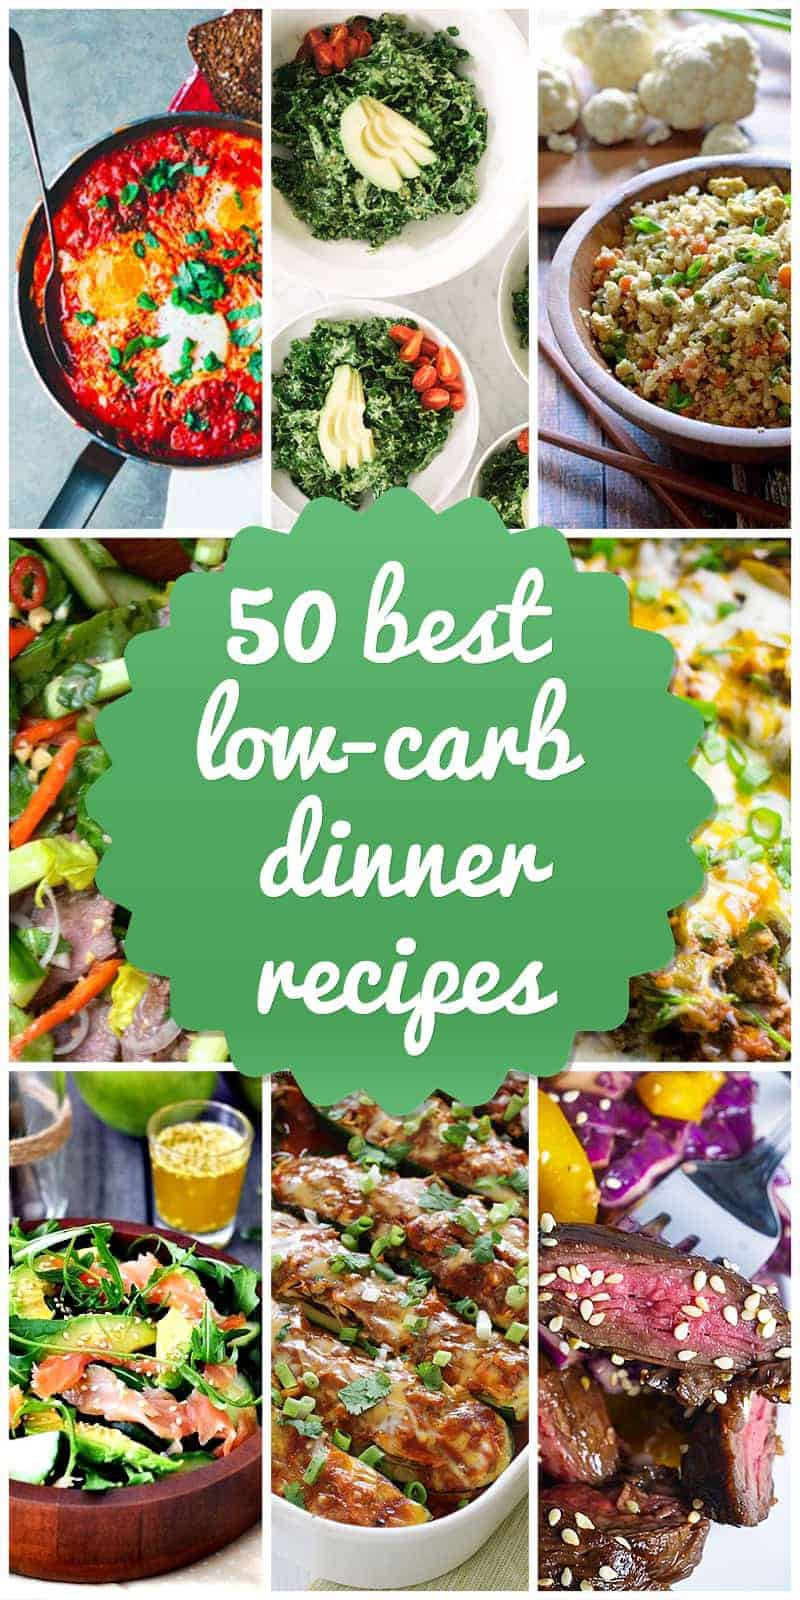 Low Carb Healthy Dinners
 50 Best Low Carb Dinners Recipes and Ideas